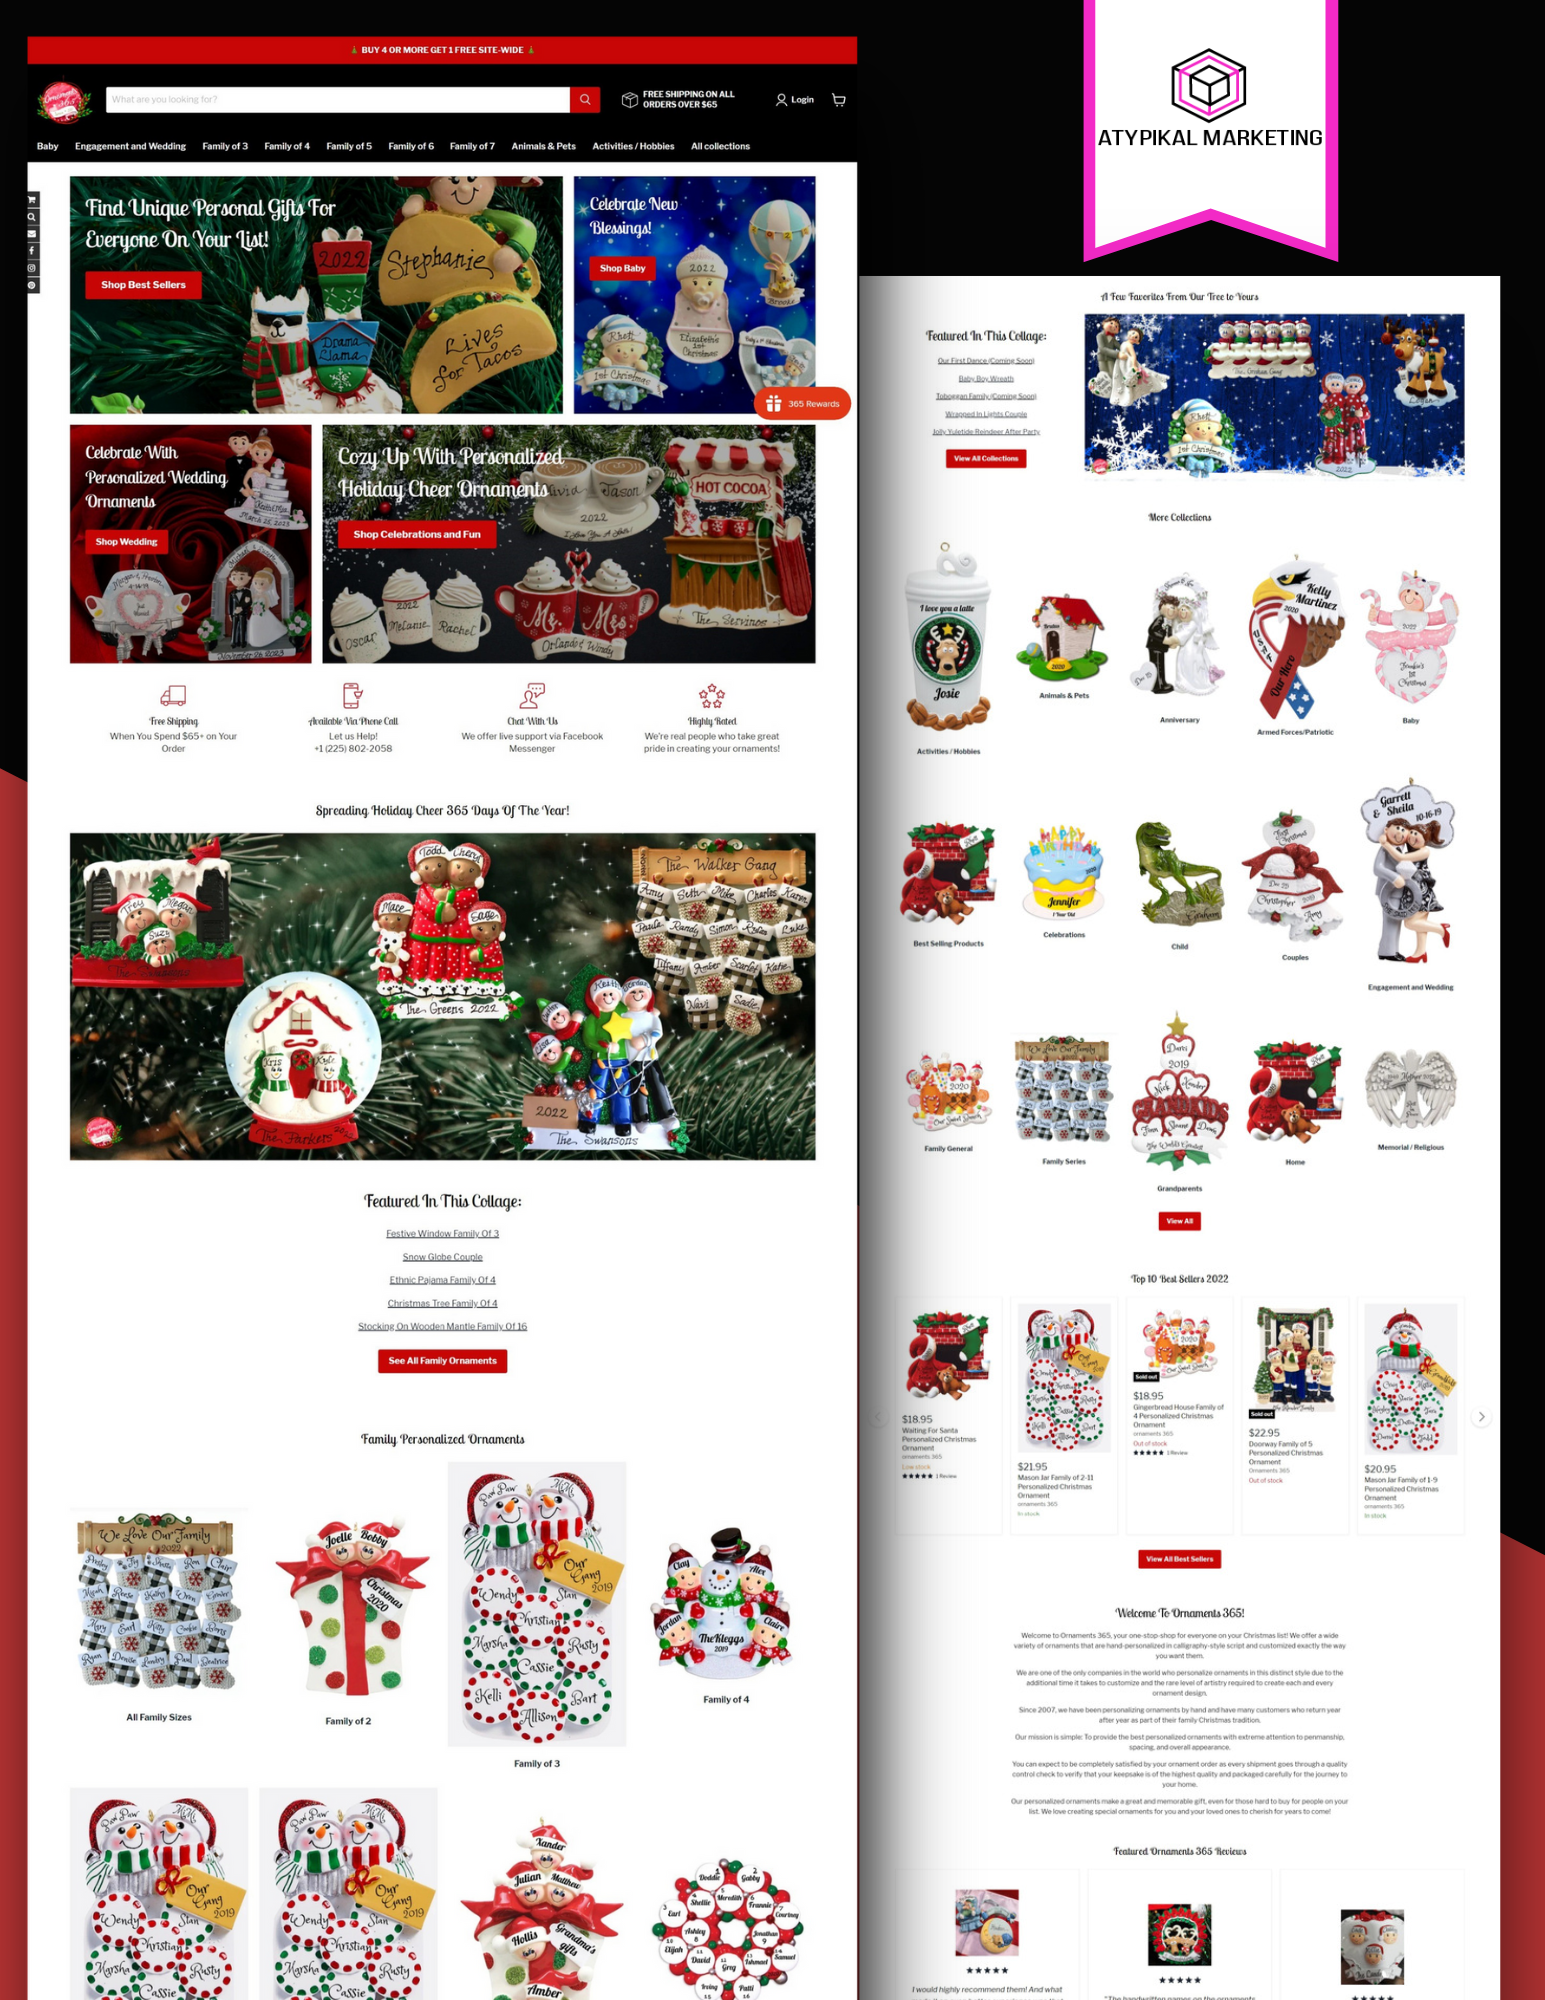 There are many different christmas ornaments on the website.